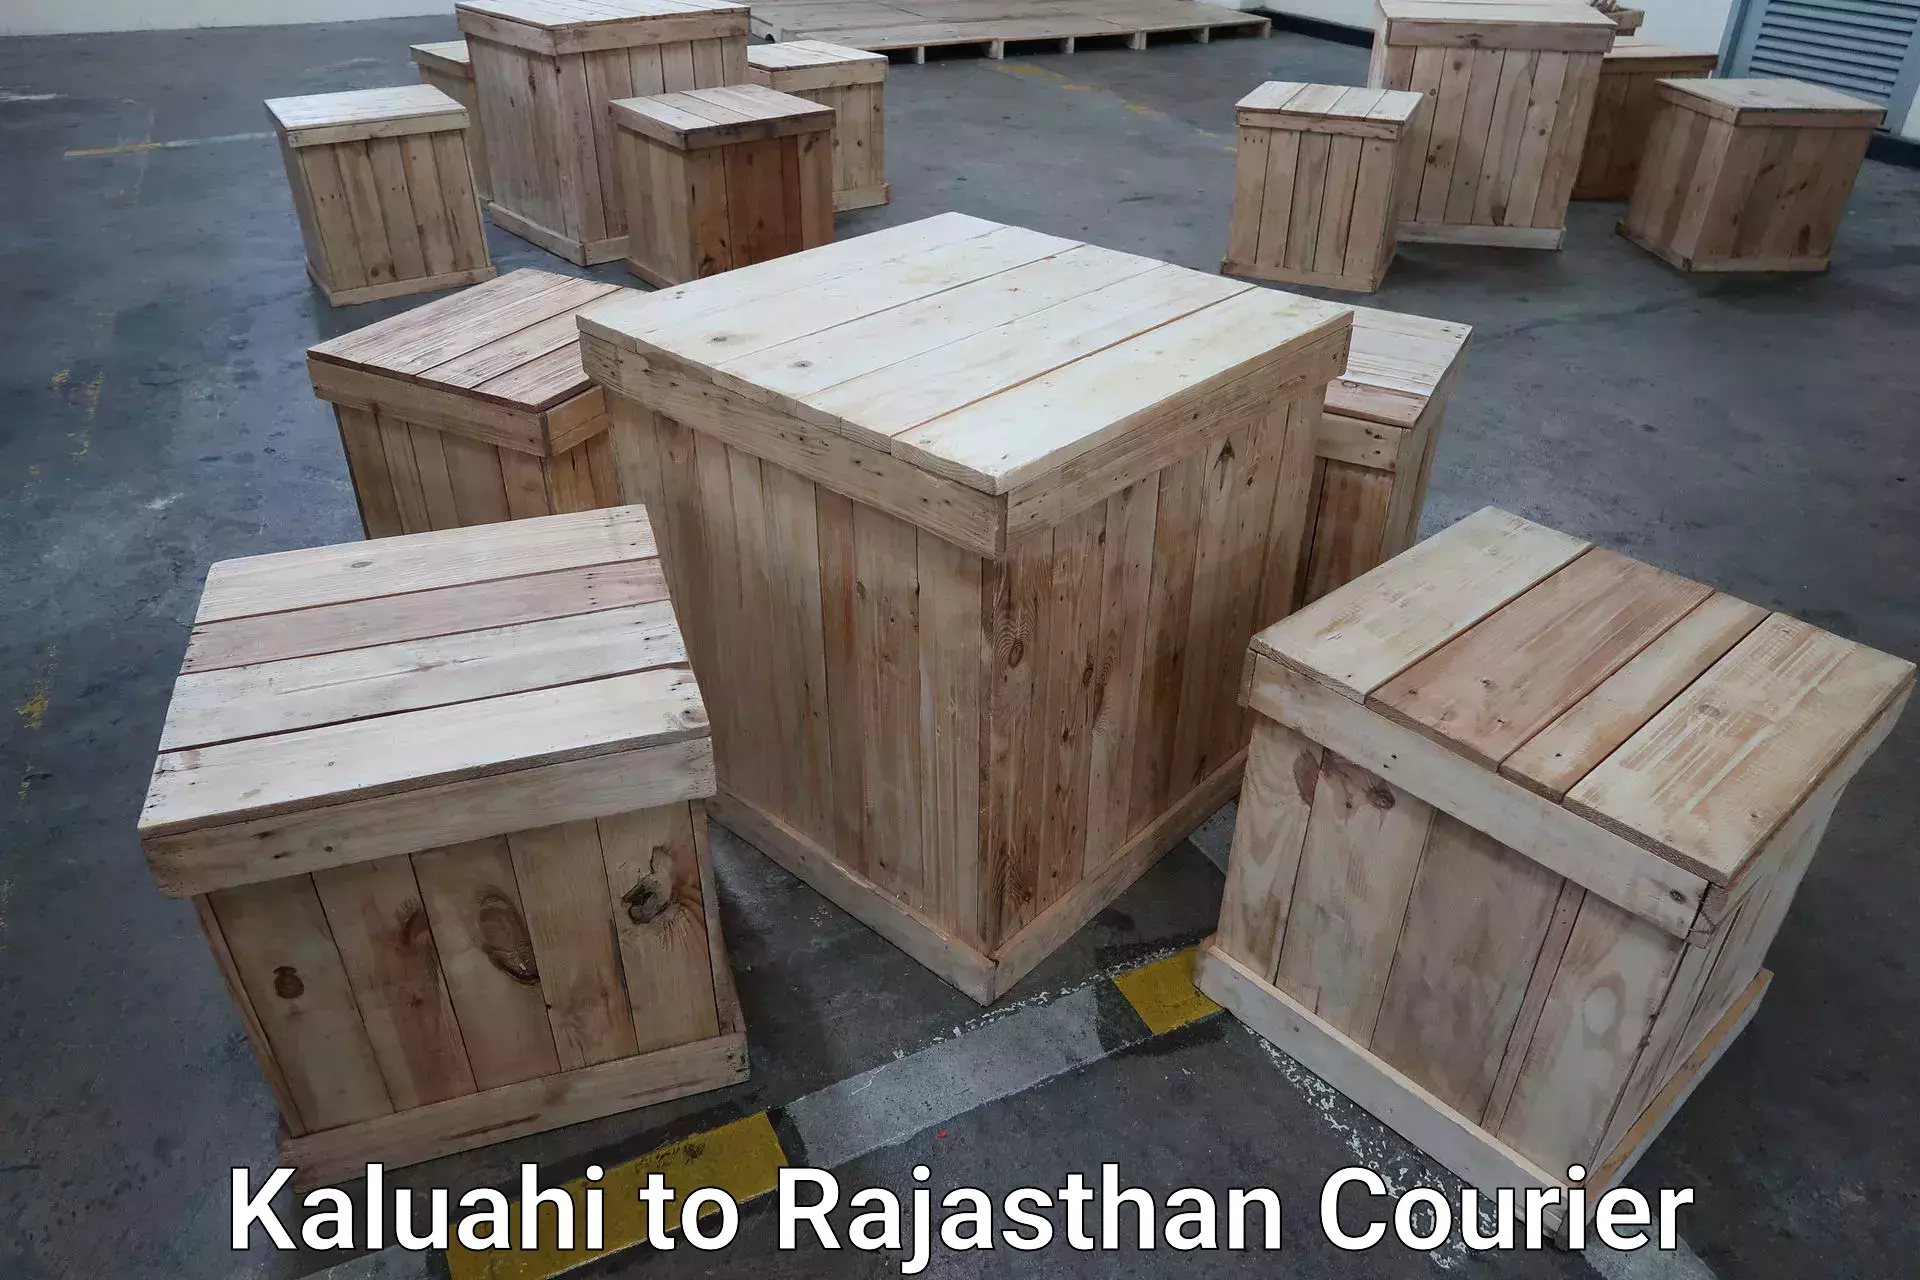 Luggage transport consultancy Kaluahi to Rajasthan